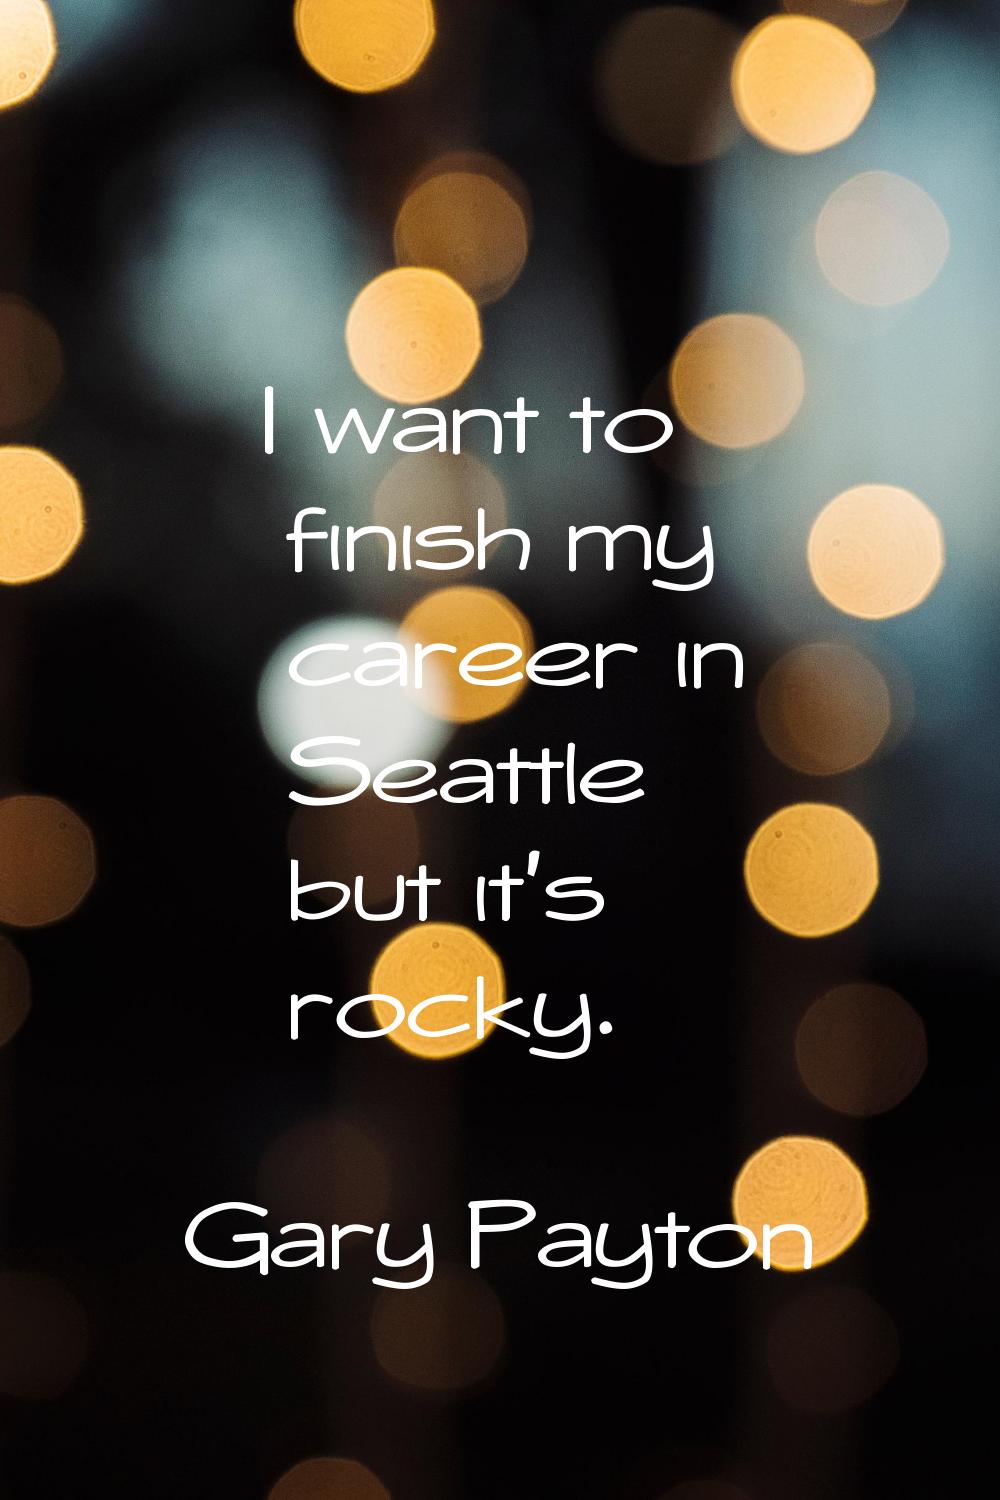 I want to finish my career in Seattle but it's rocky.